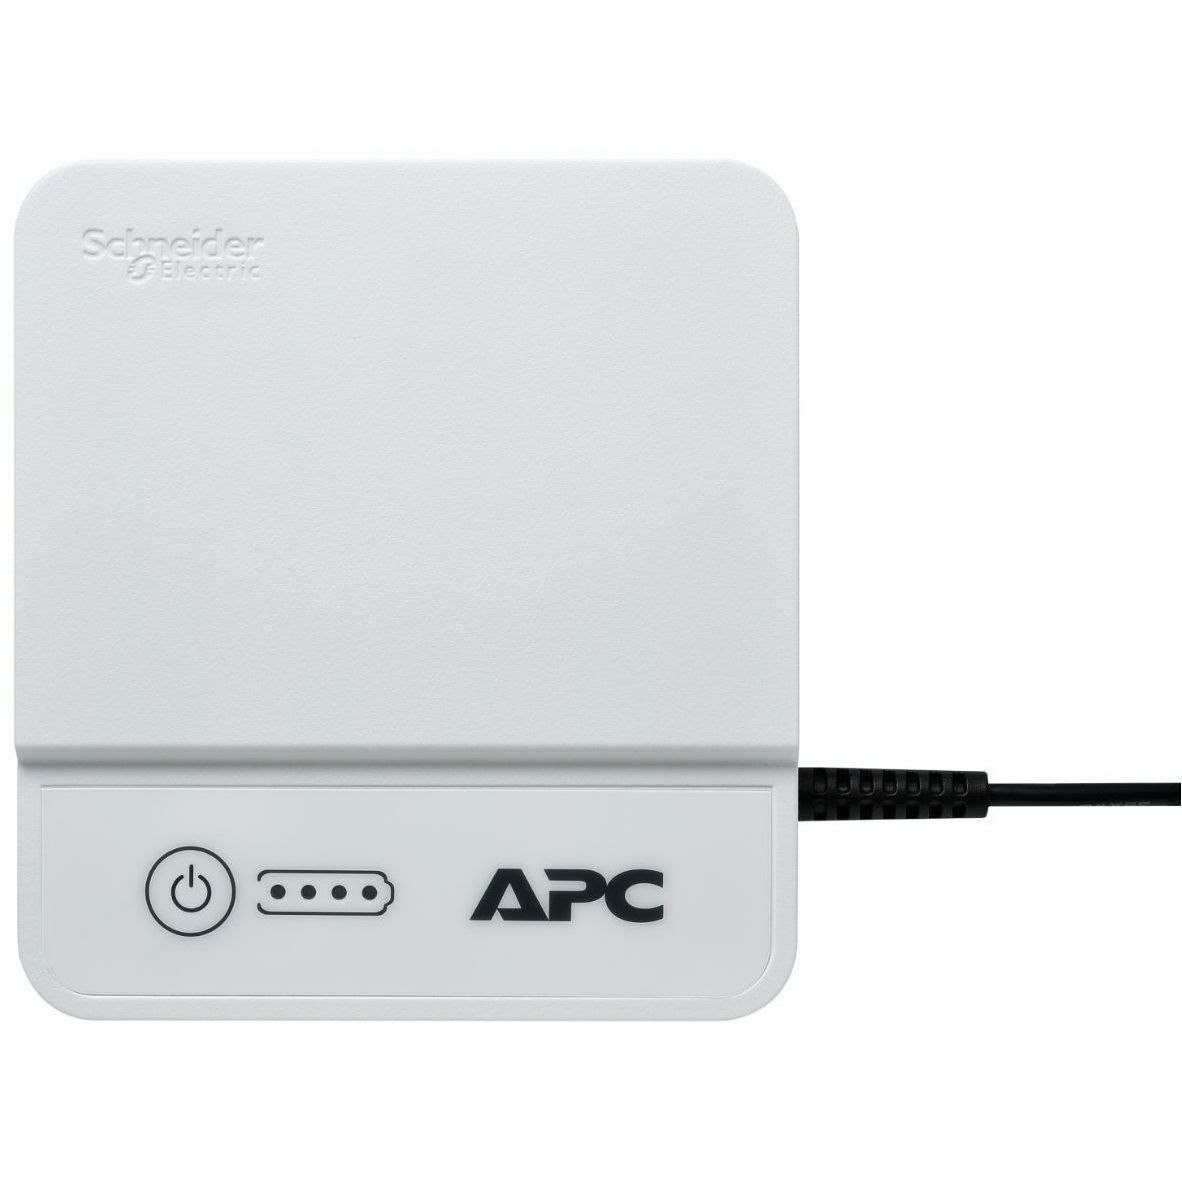 APC by Schneider Electric Back-UPS Connect Standby UPS - 36 W